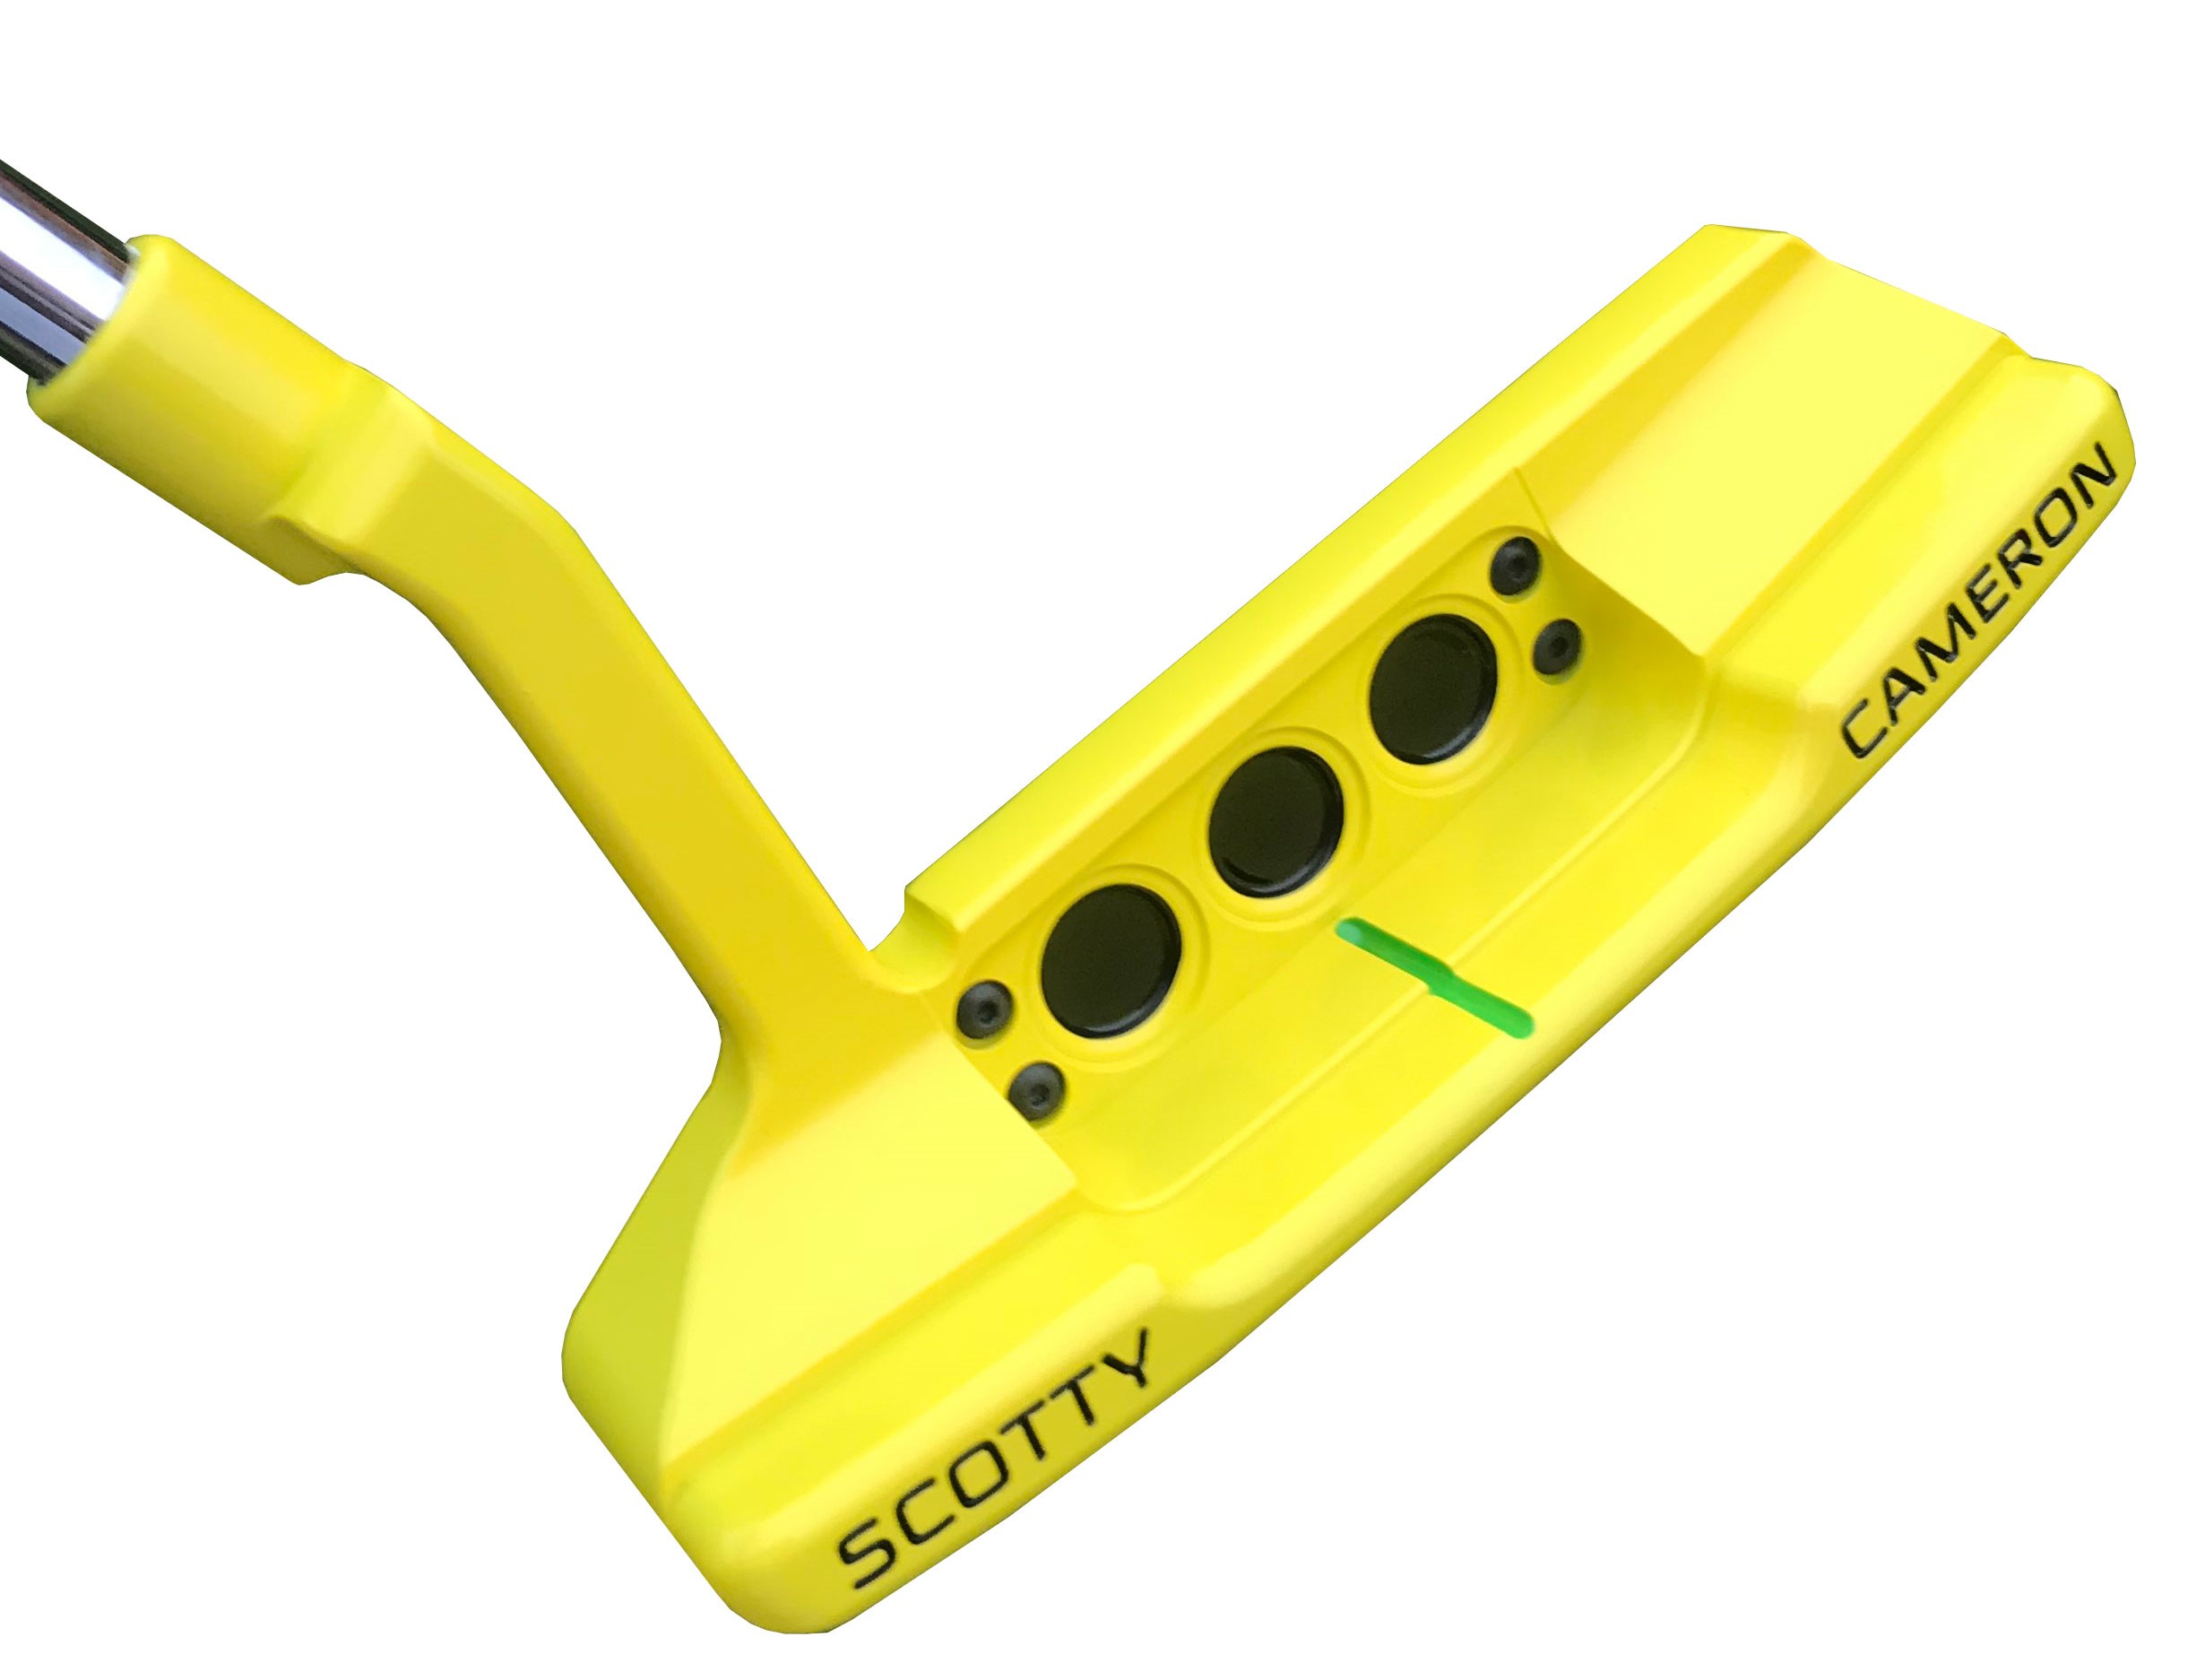 These custom Scotty Cameron Newport 2 putters are a little bit